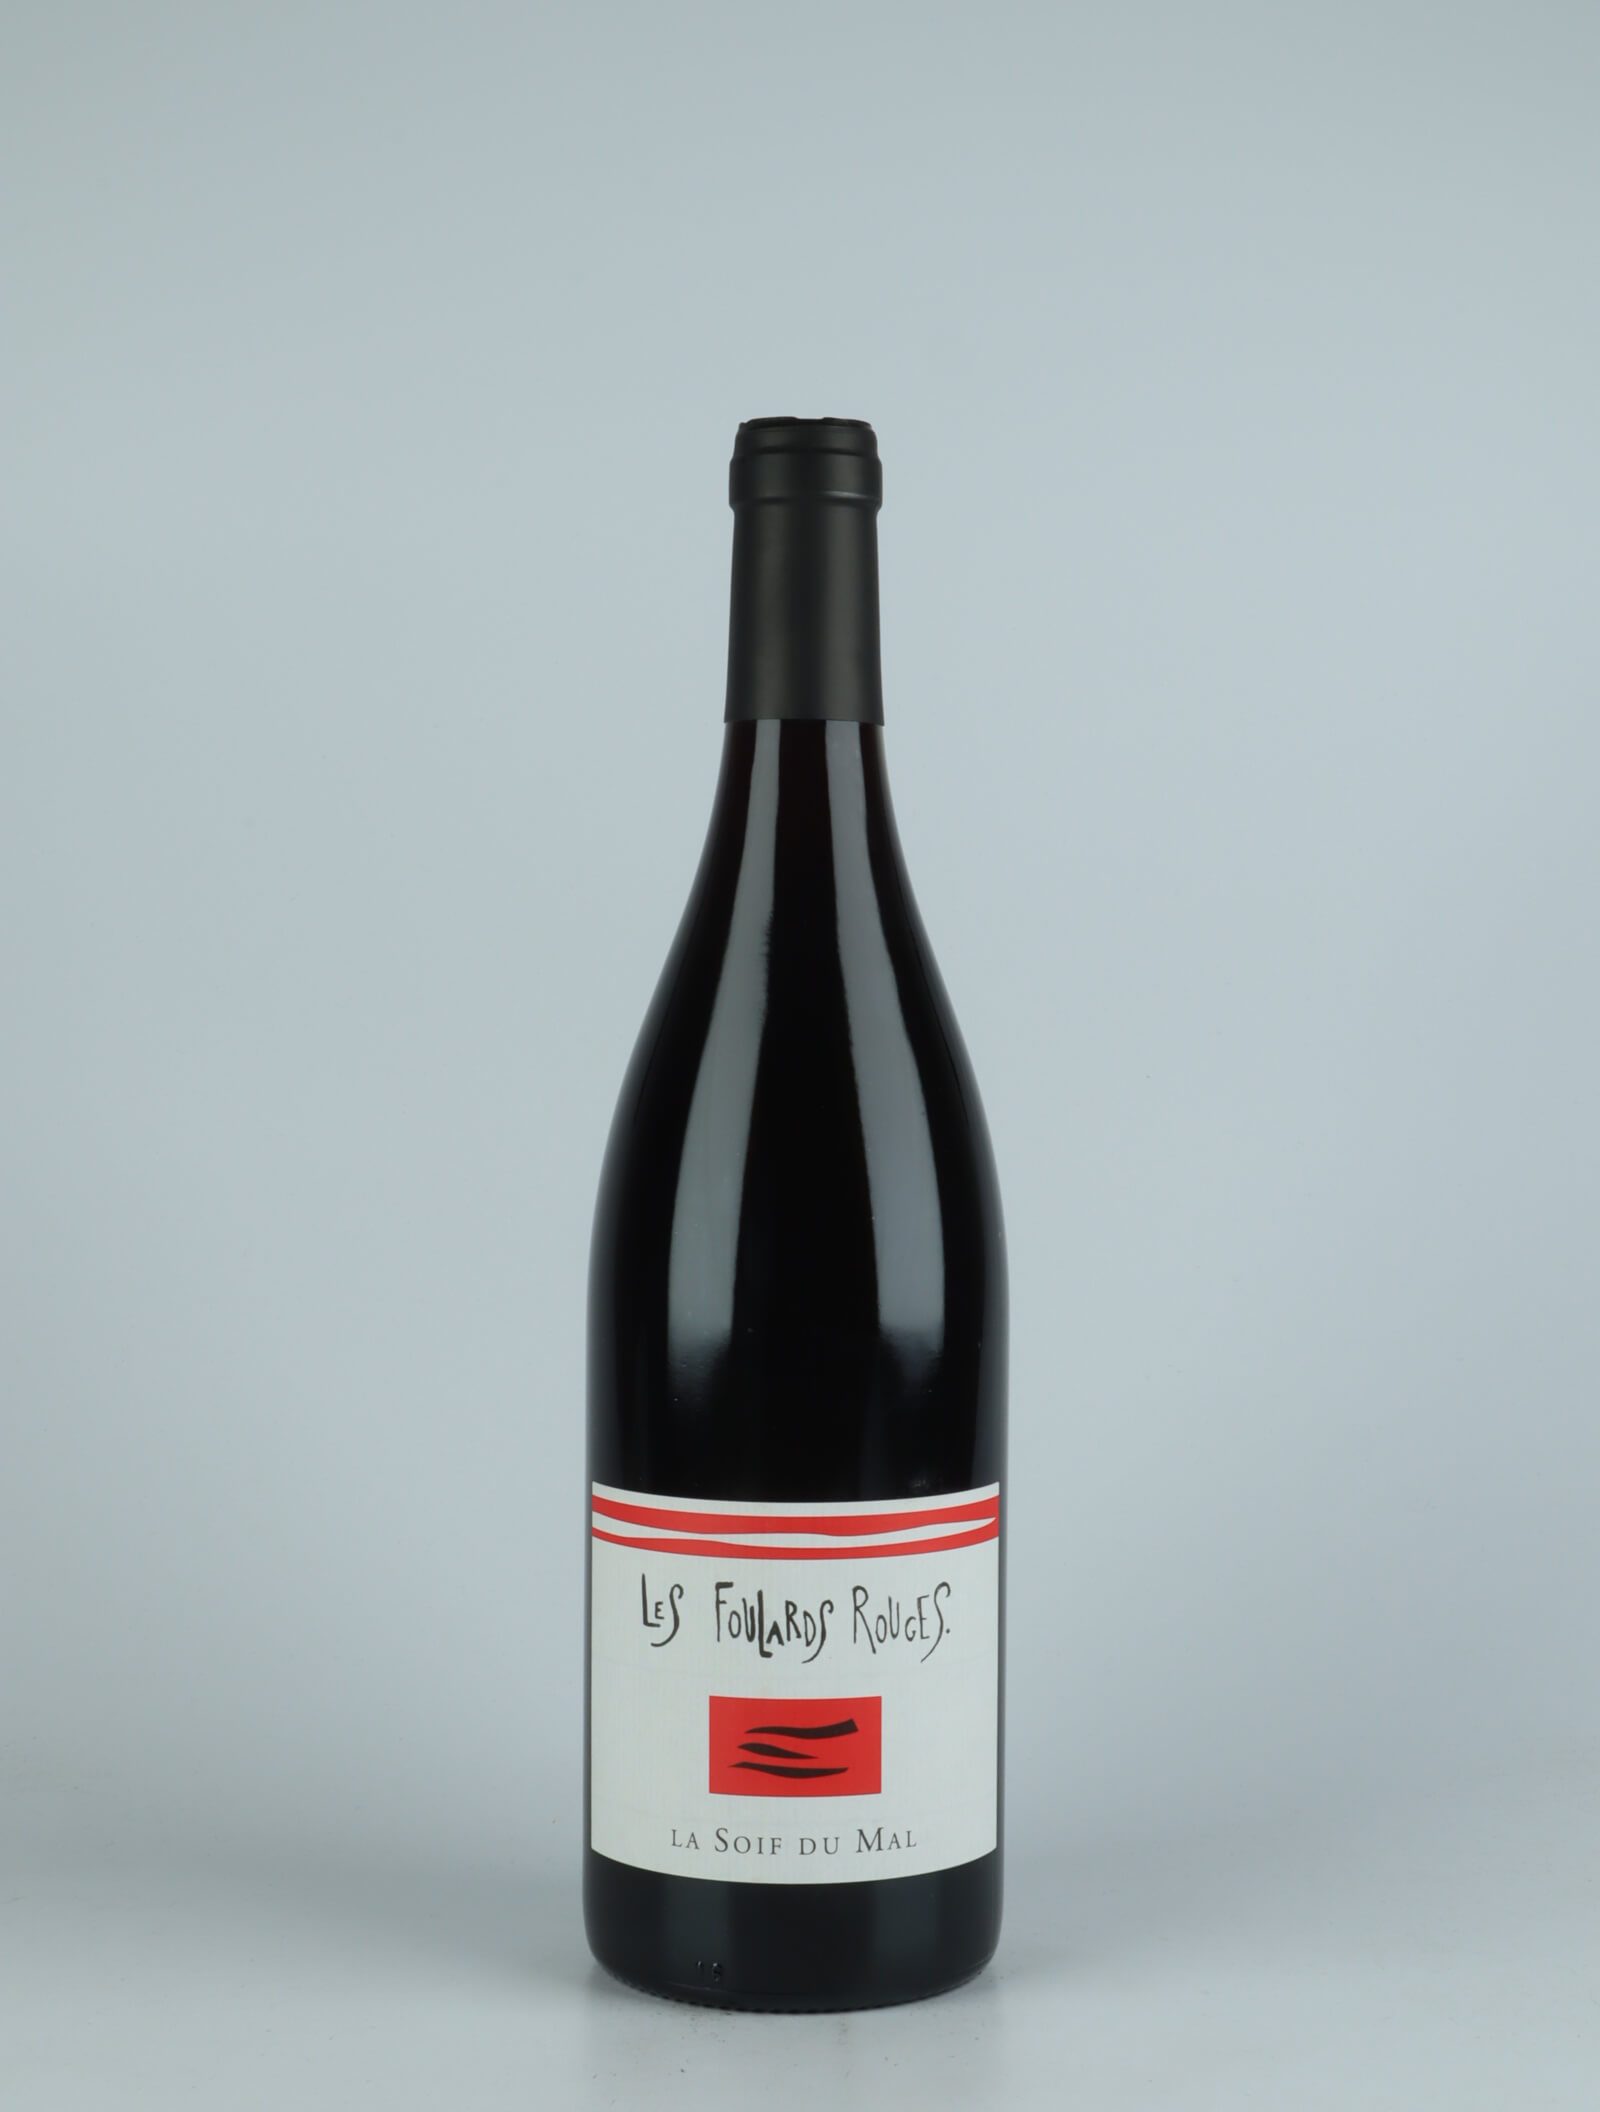 A bottle 2021 Soif du Mal Rouge Red wine from Les Foulards Rouges, Languedoc in France